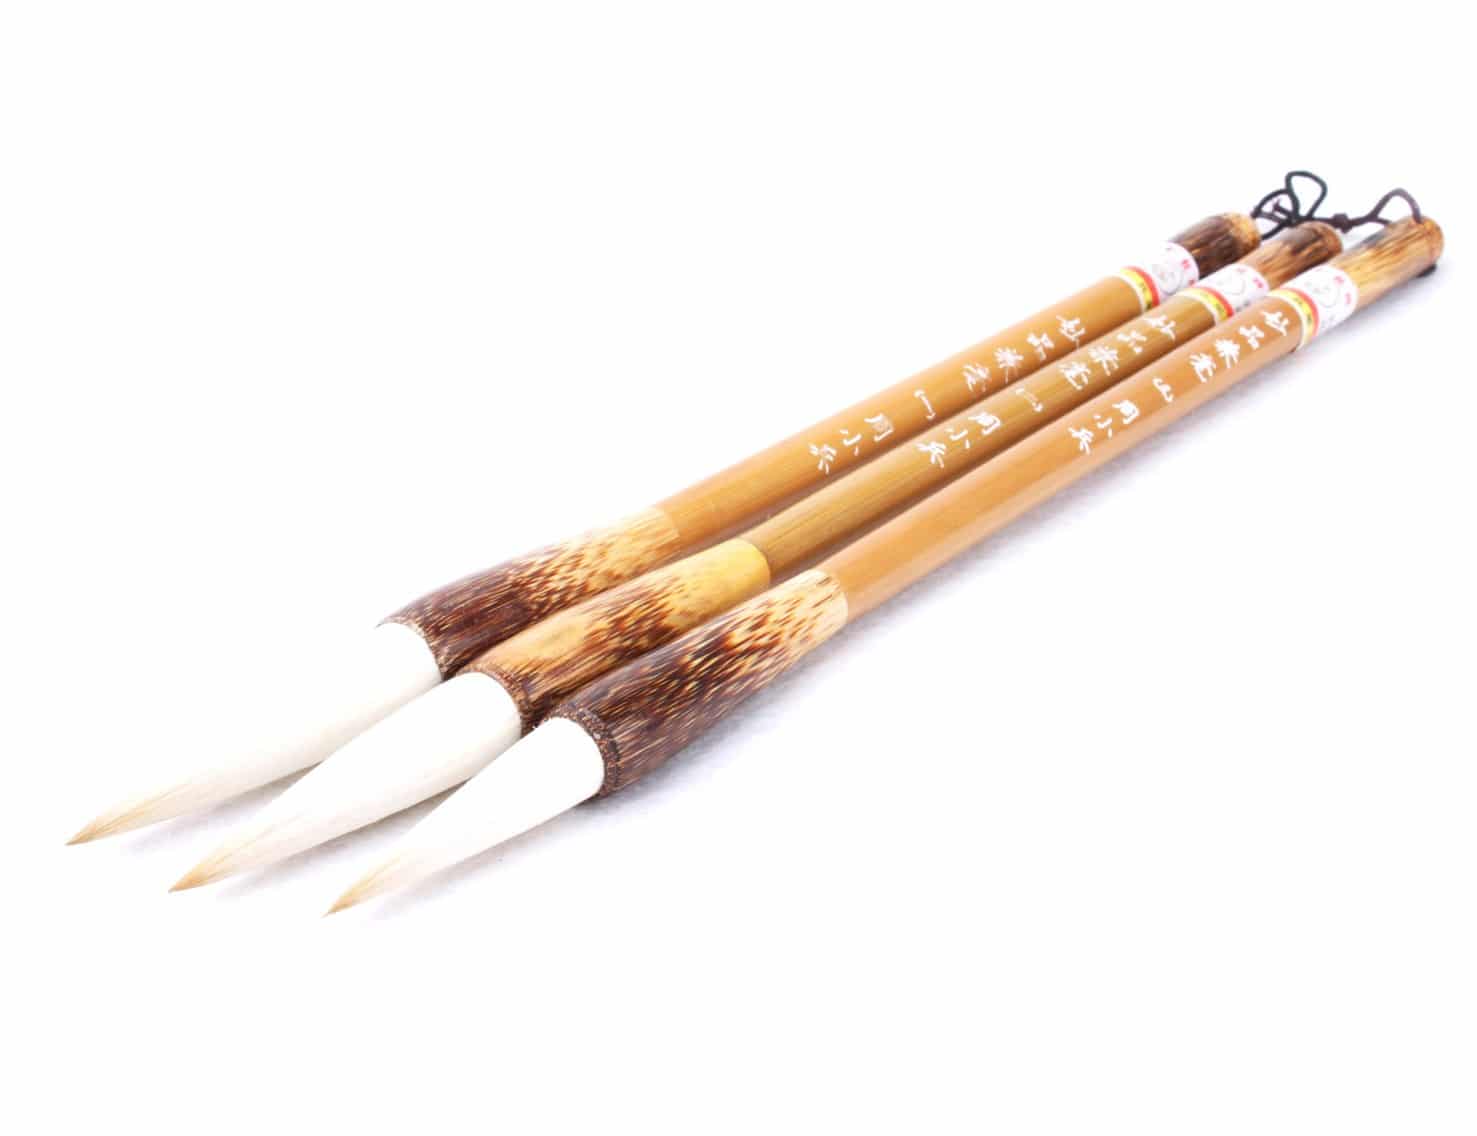 Bamboo Artist Brushes - Sessions College for Professional Design